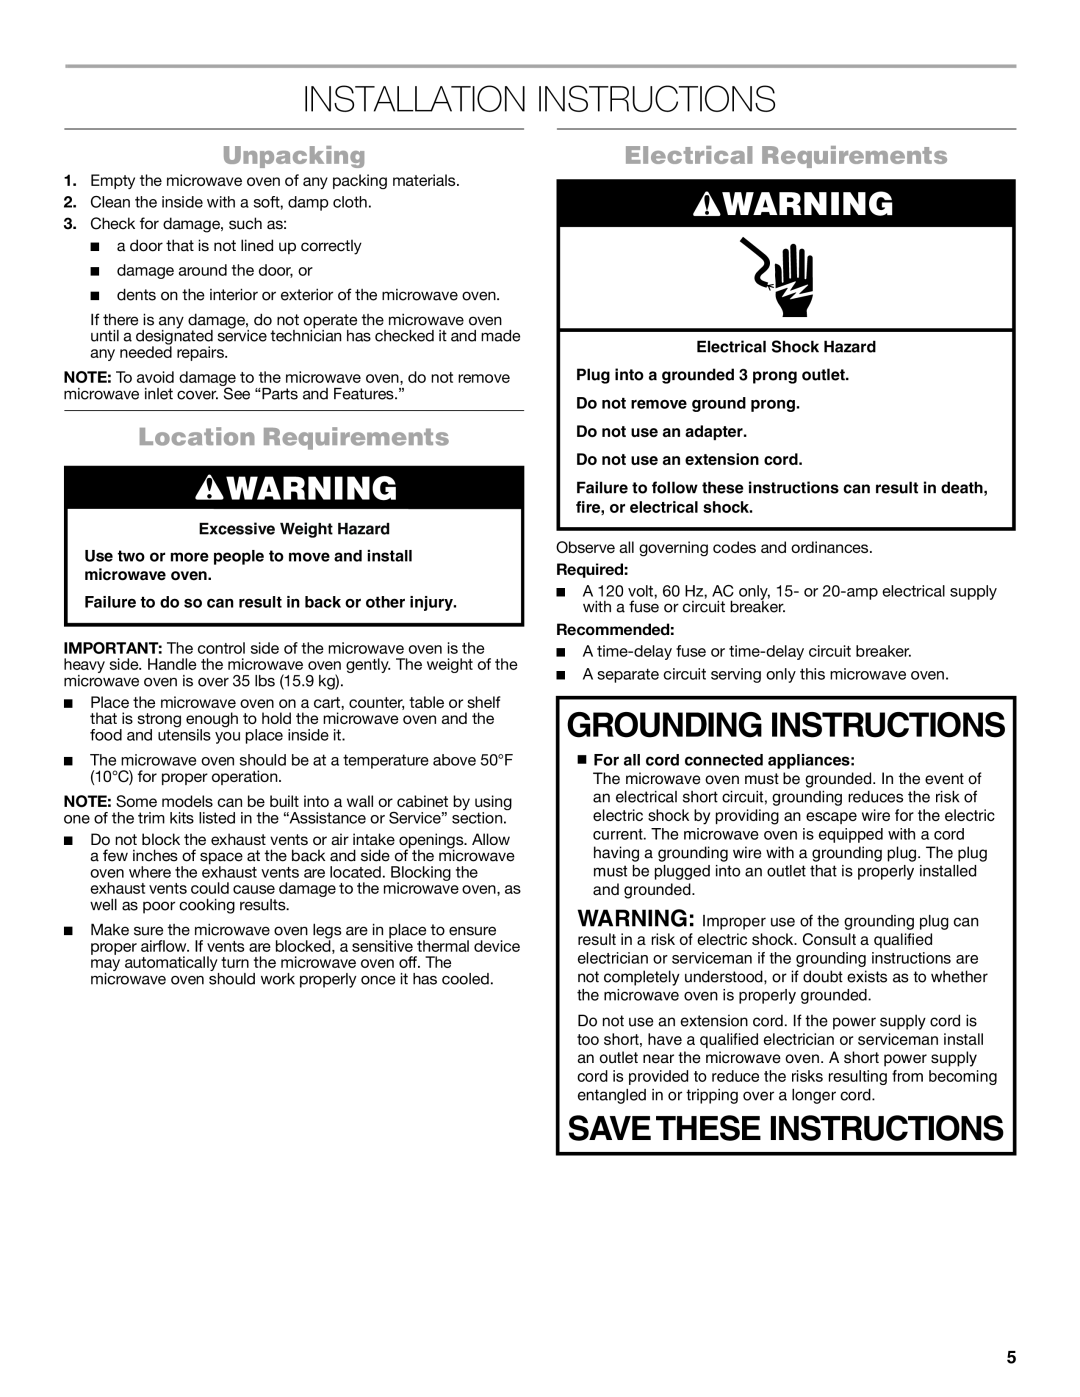 Jenn-Air W10491278A manual Installation Instructions, Grounding Instructions, Unpacking, Location Requirements, Required 